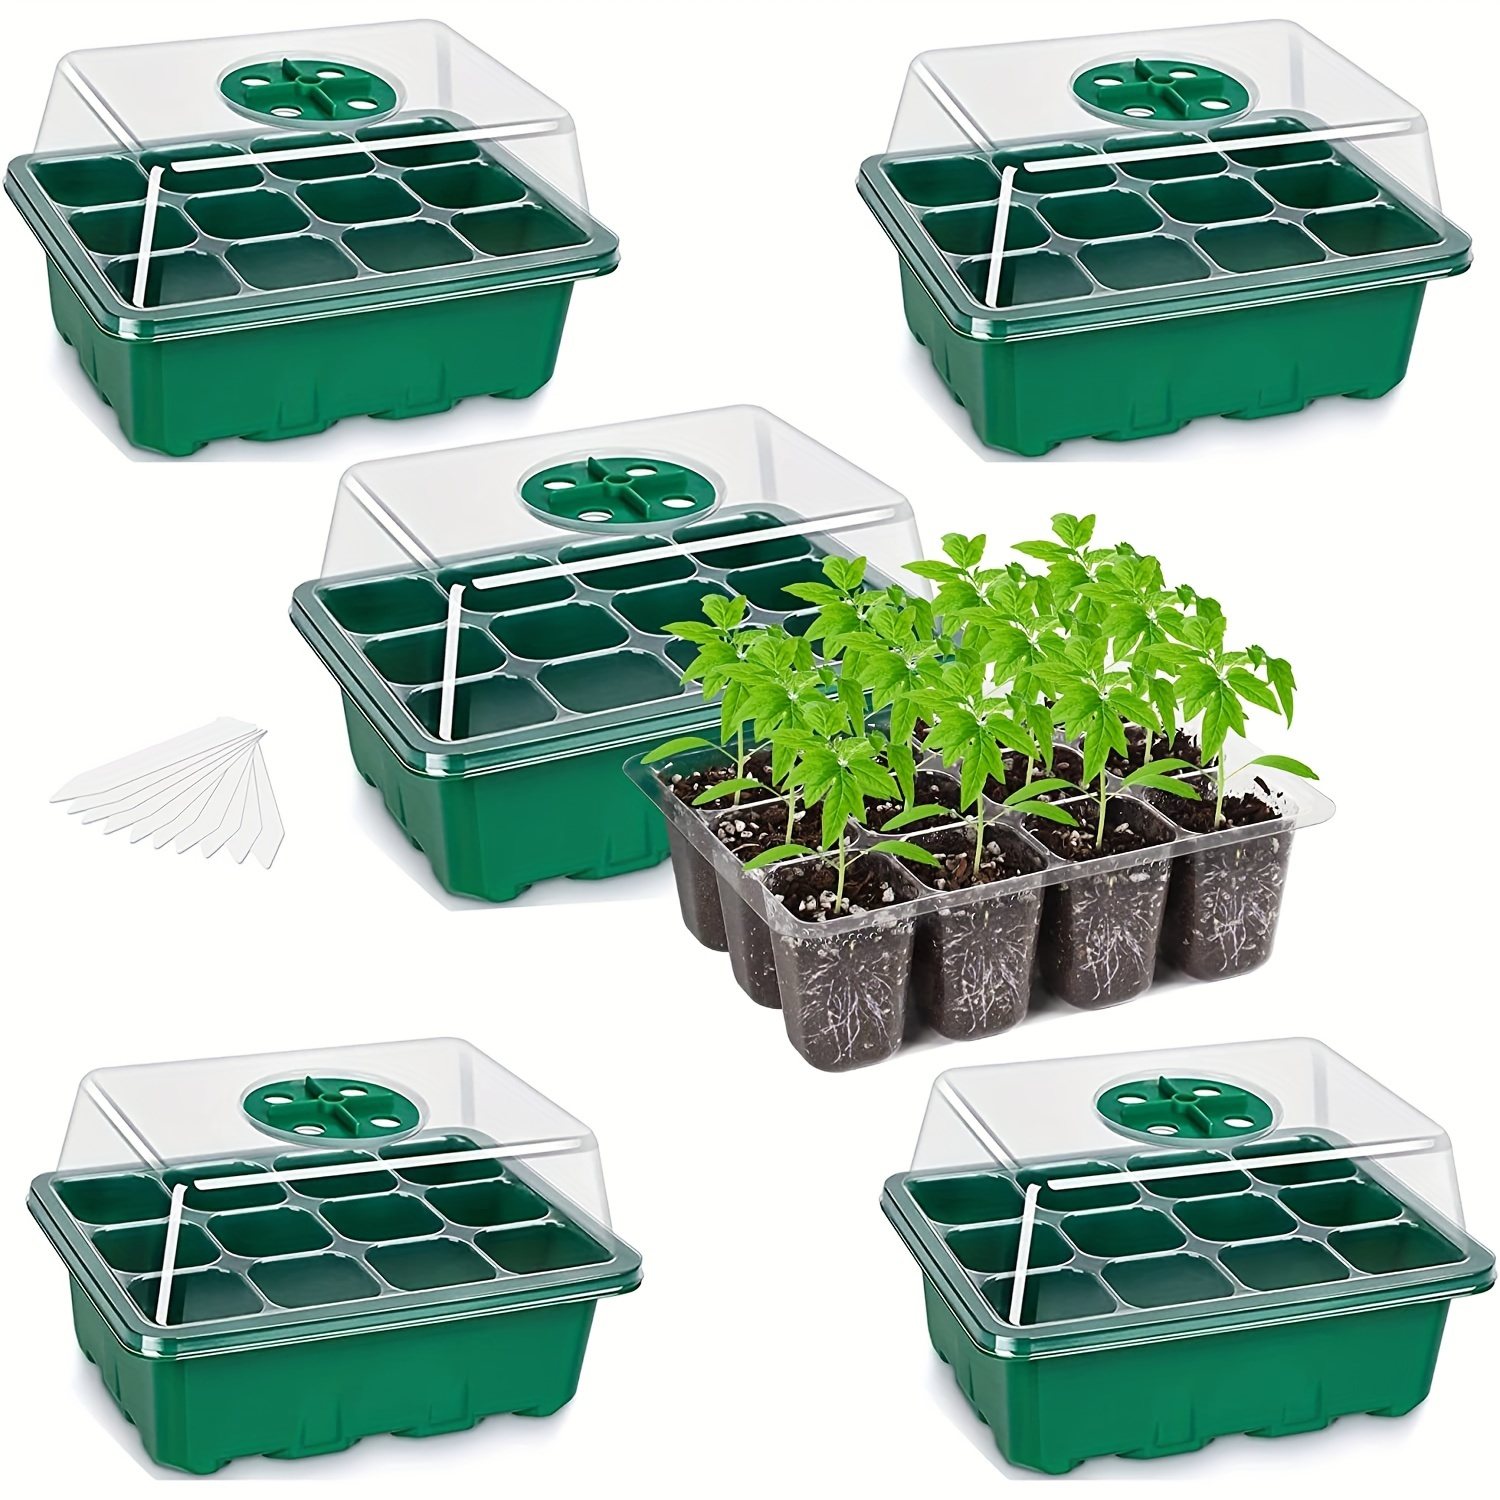 Hanaoyo Reusable Seed Starter Tray, 5 Pcs Seed Starter Kit with Flexible Pop-Out Cells (60 Cells in Total), Seedling Starter Trays for Seed Starter